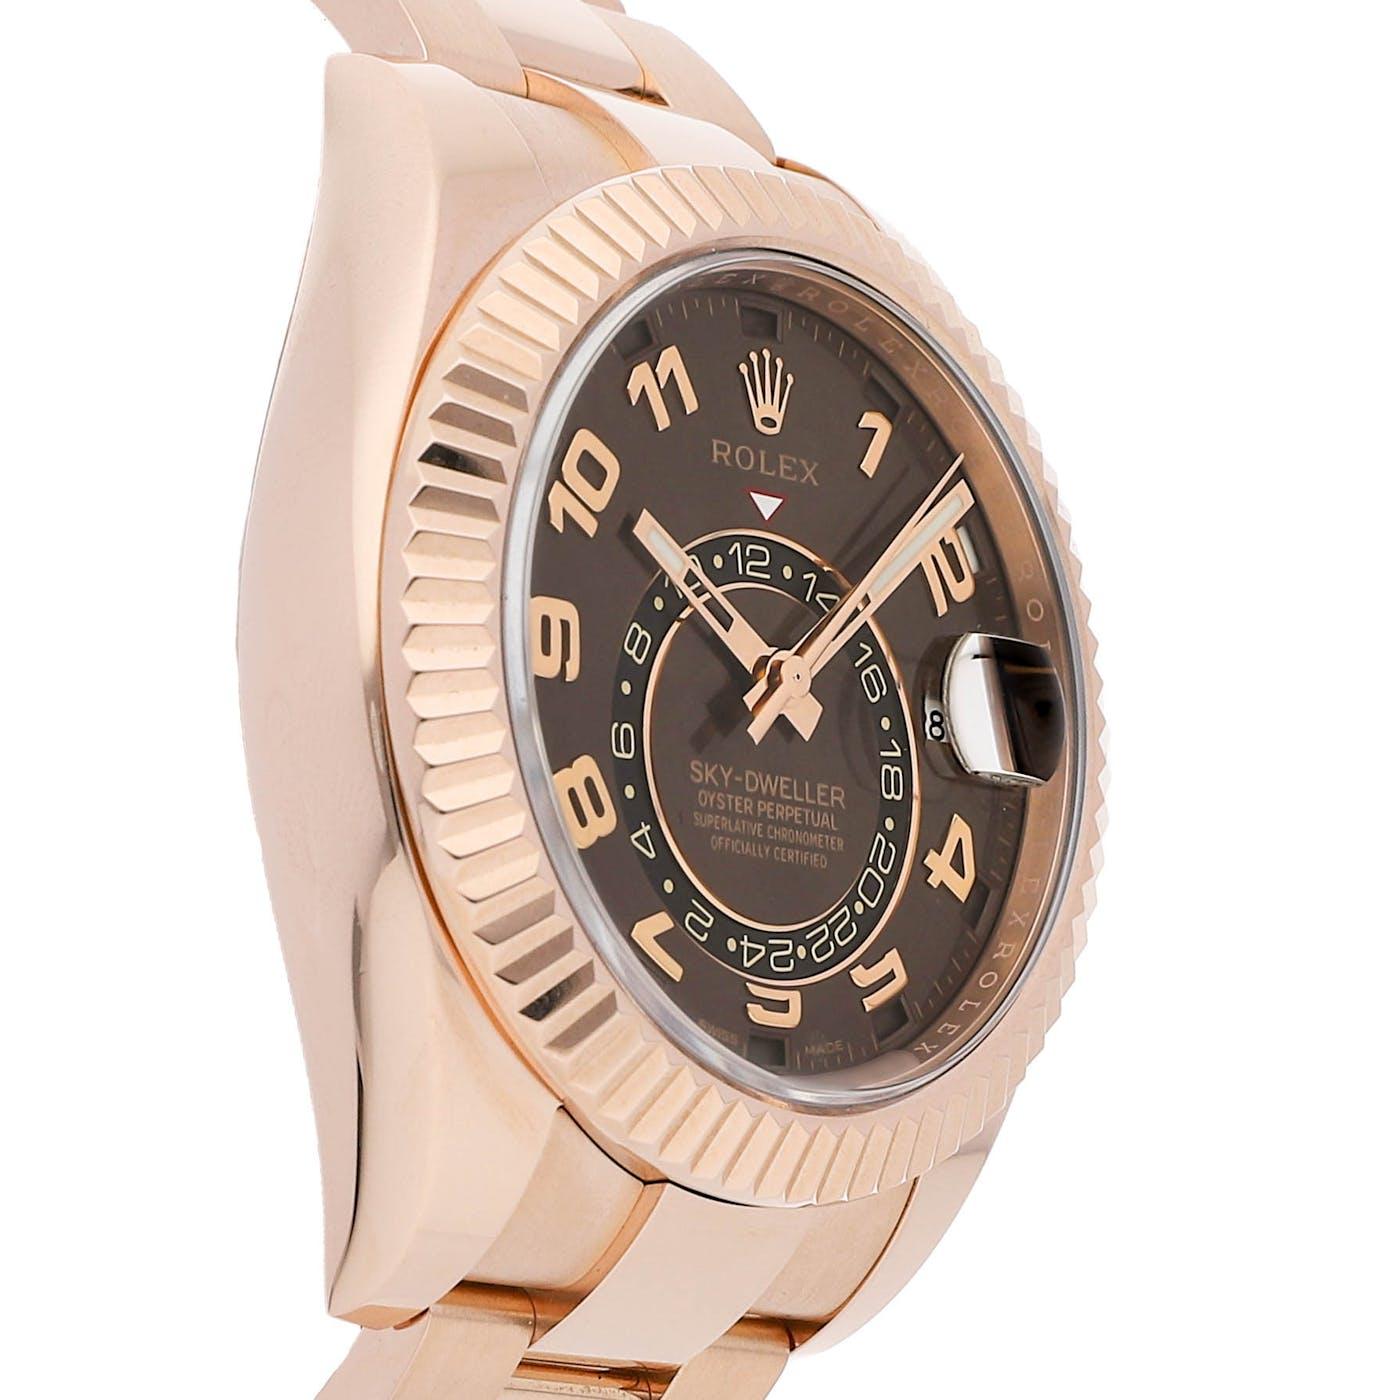 Rolex skydweller rose gold chocolate dial